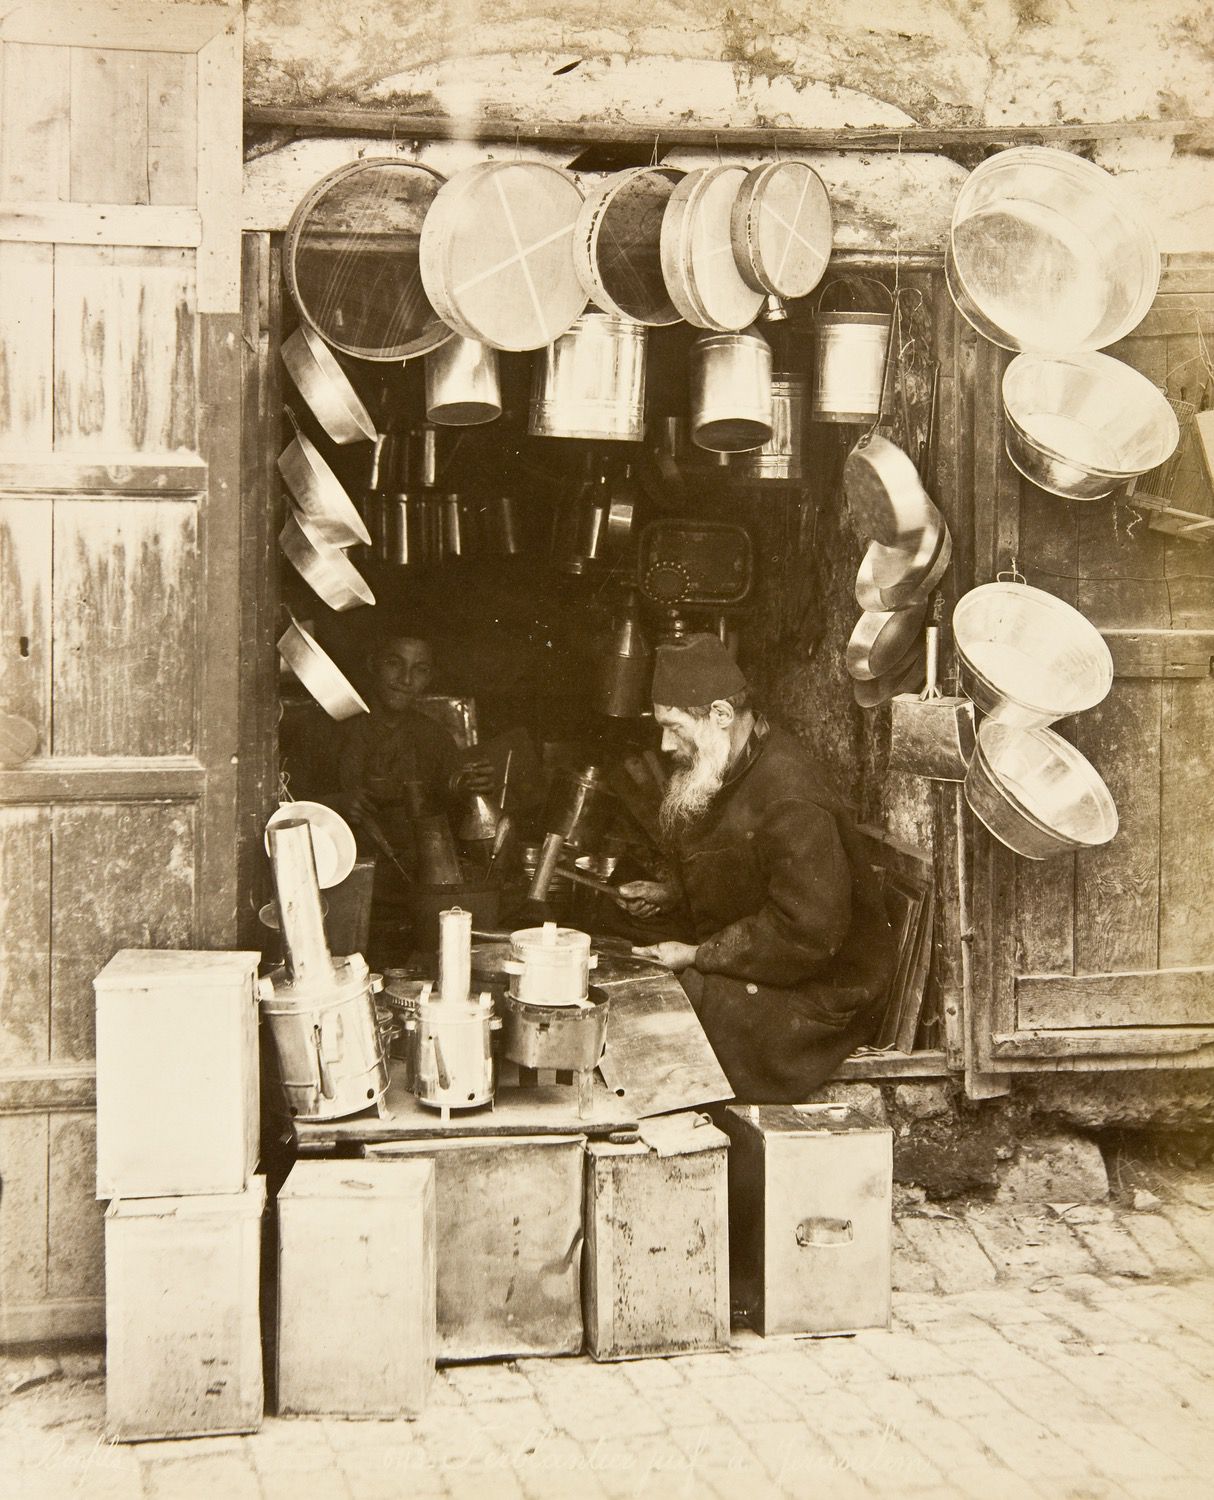  Jerusalem - View of a tinsmith working in his shop